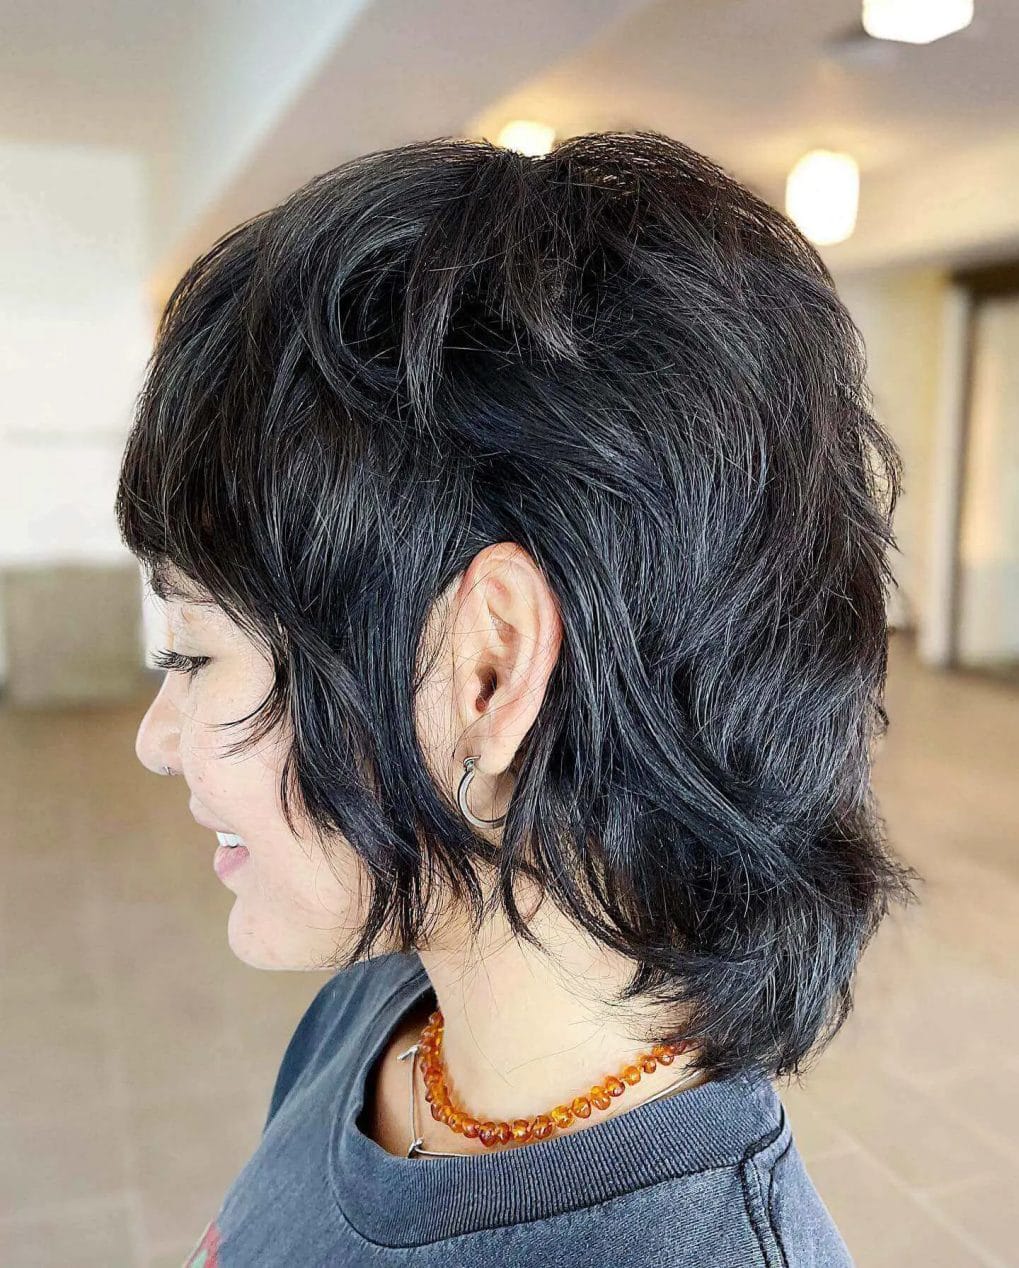 Mullet-shag hybrid with textured layers and a tousled finish.